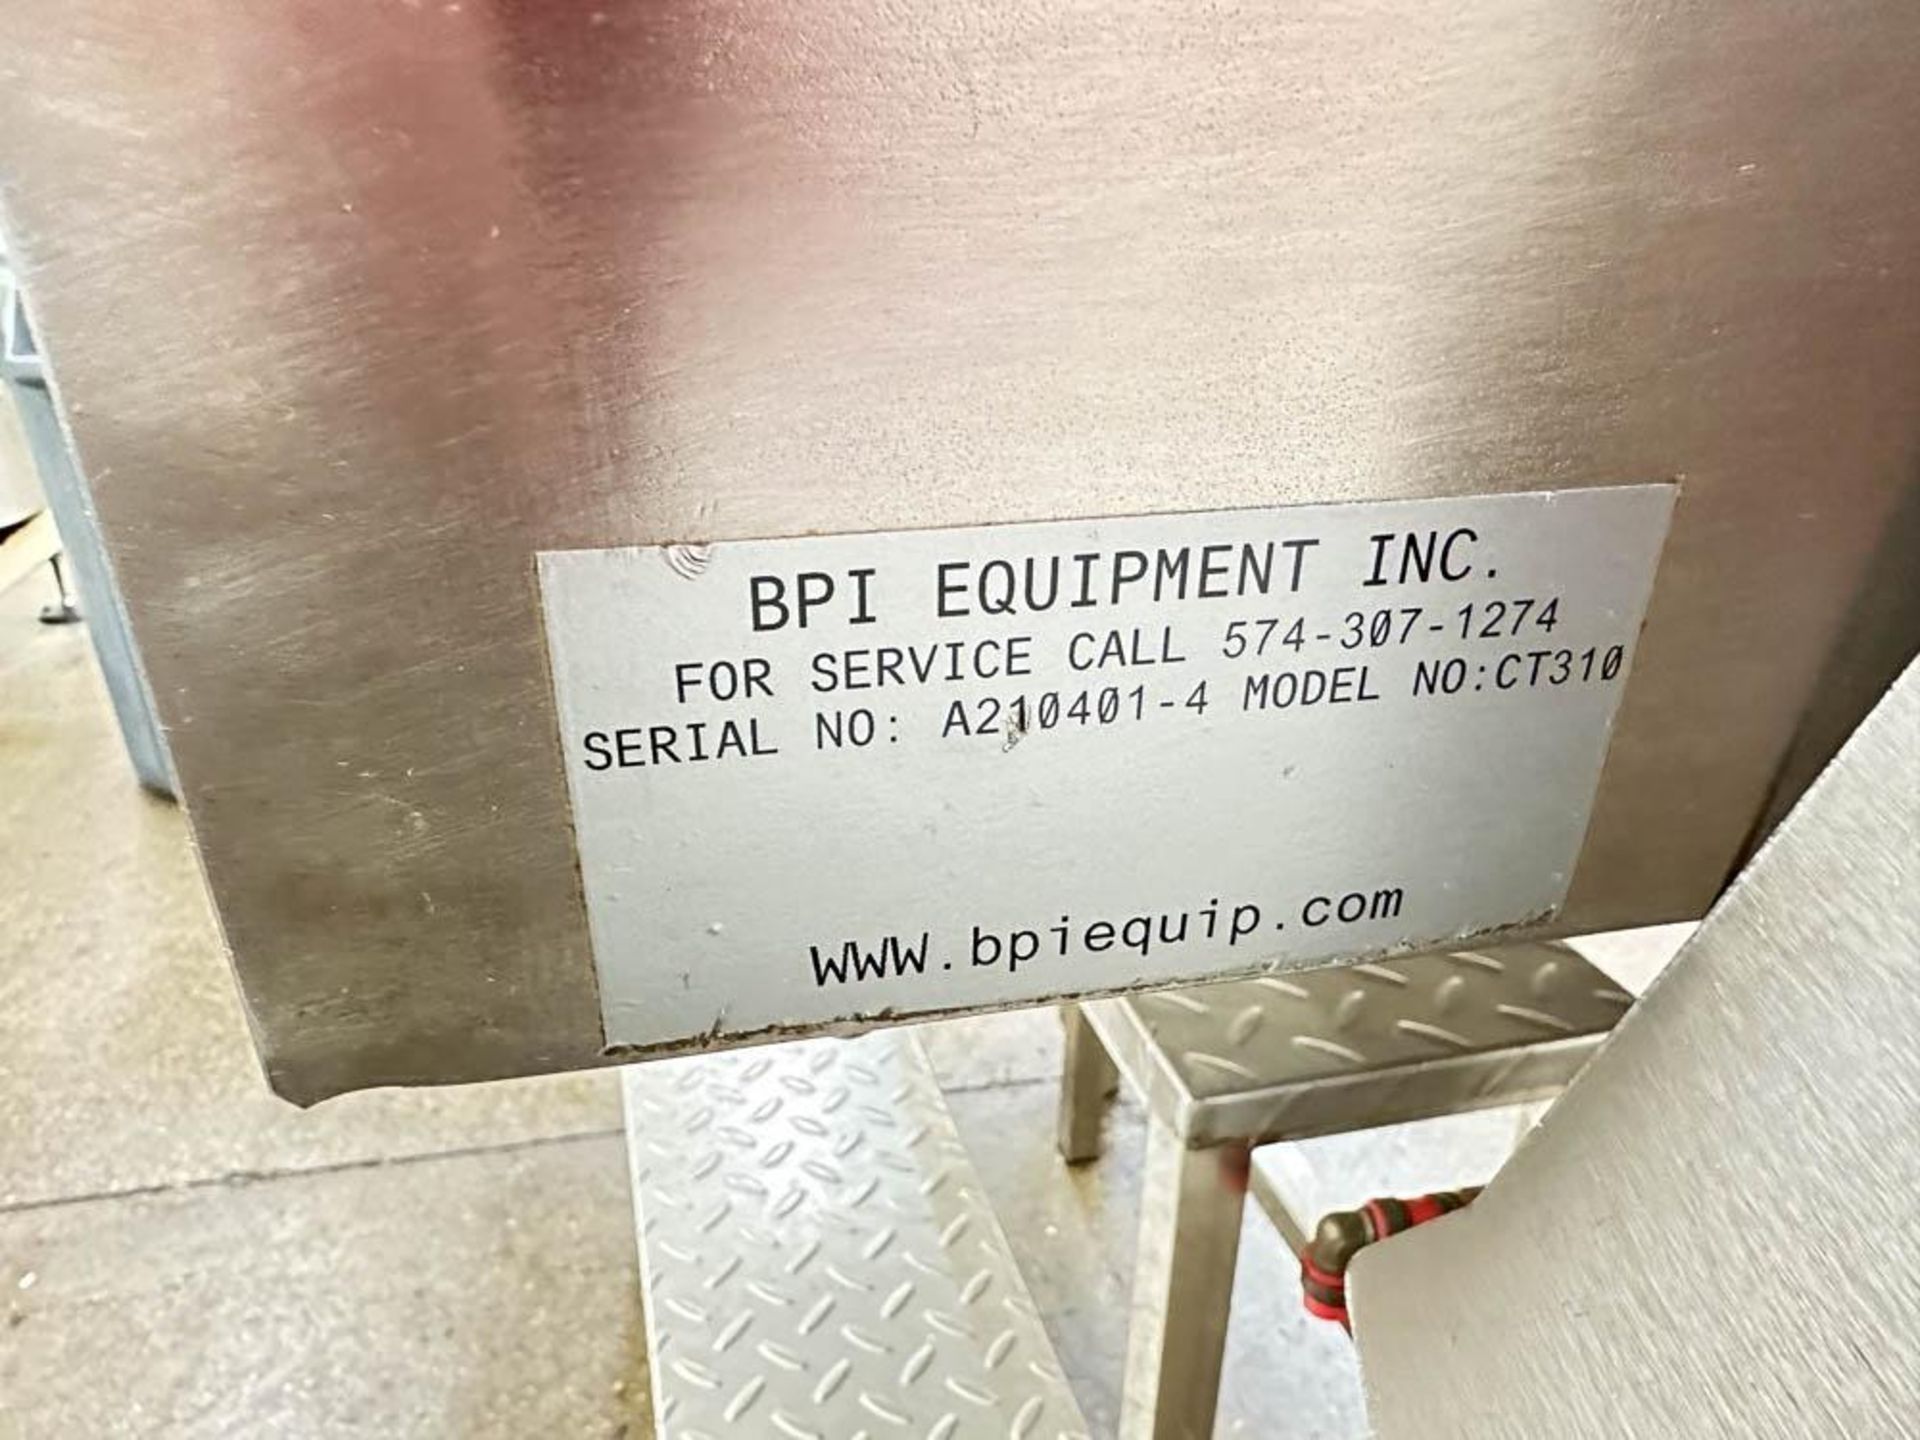 NEW 2021 BPI Kettle Corn Popcorn Popper, Model: PK900, S/N: A210401-6 with with Hydraulic Pump Tilt - Image 2 of 2